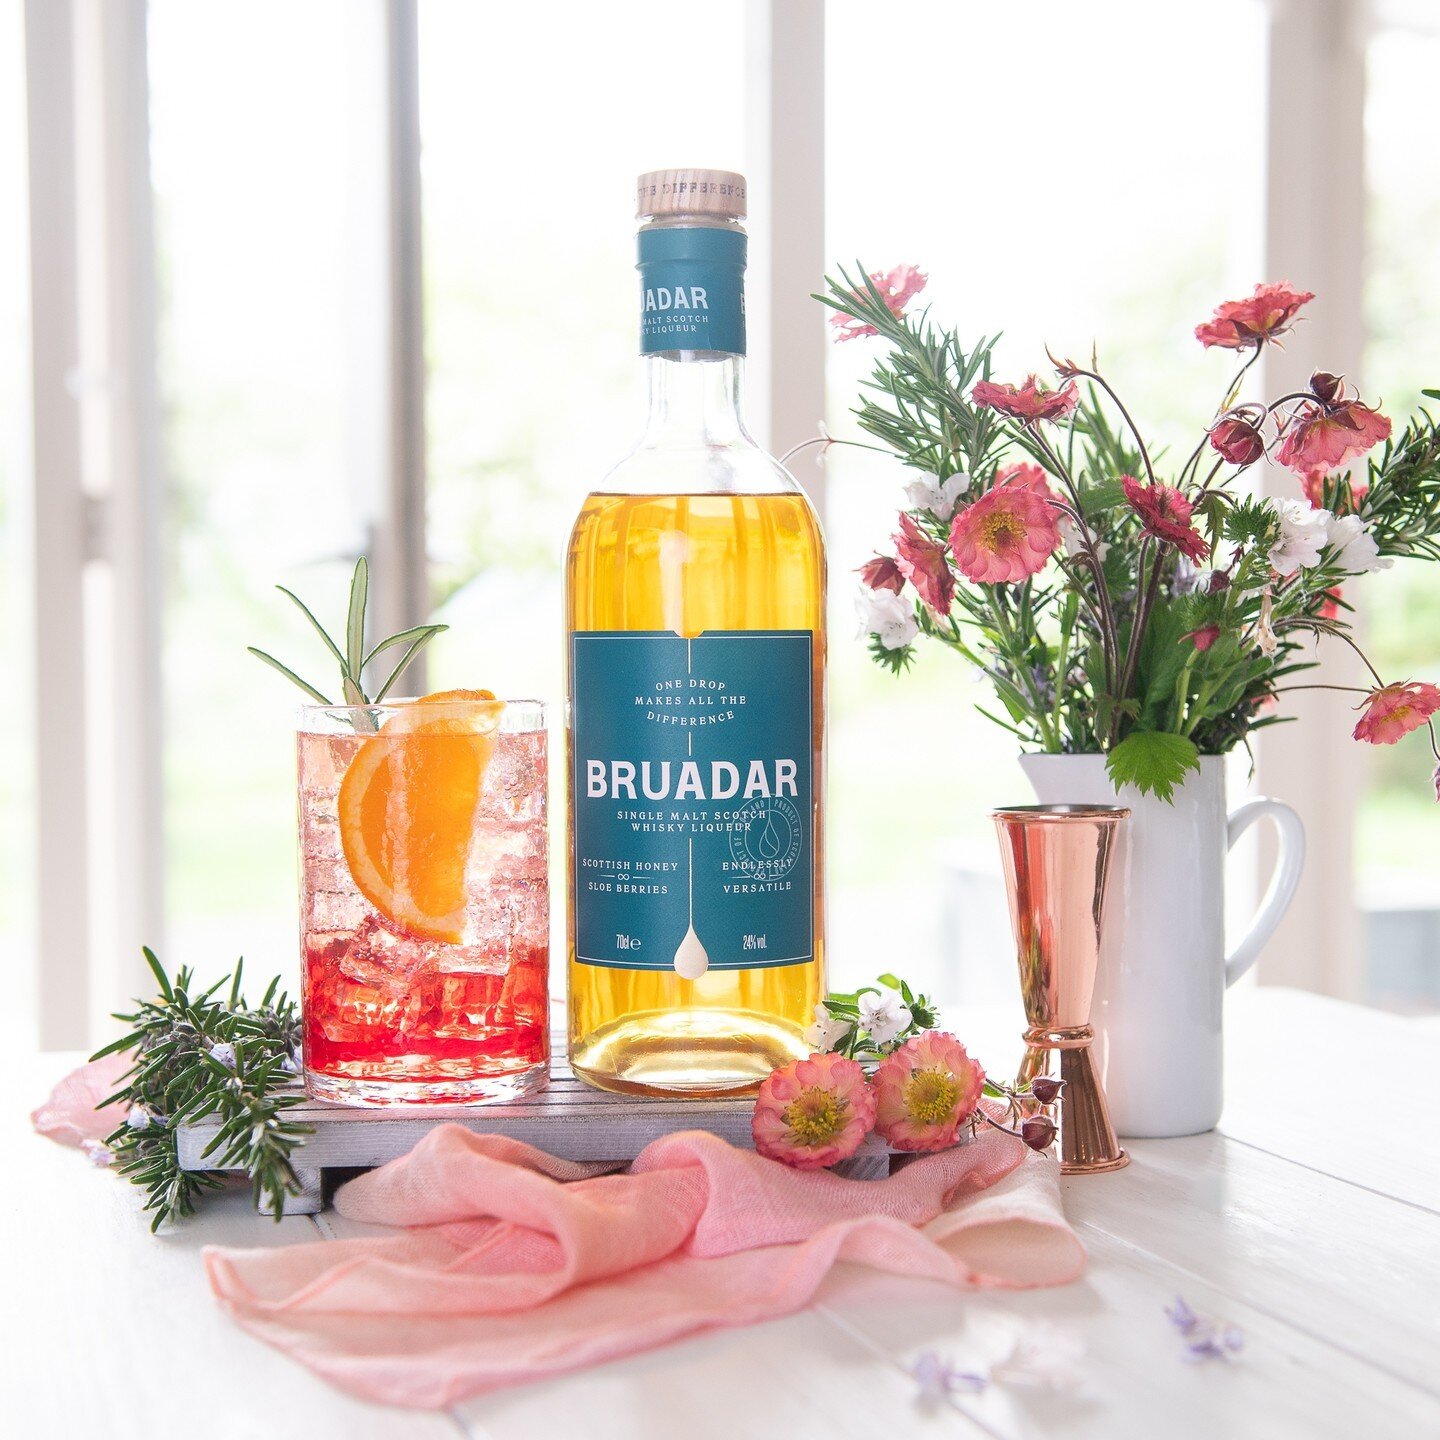 The Summer Cup, created by @scottishmixology , is a great whisky twist on a seasonal classic with a bitter liqueur perfectly balanced with Bruadar's honey notes and some citrusy tonic. Raid your herb garden, add a slice of fresh orange and enjoy. Eas